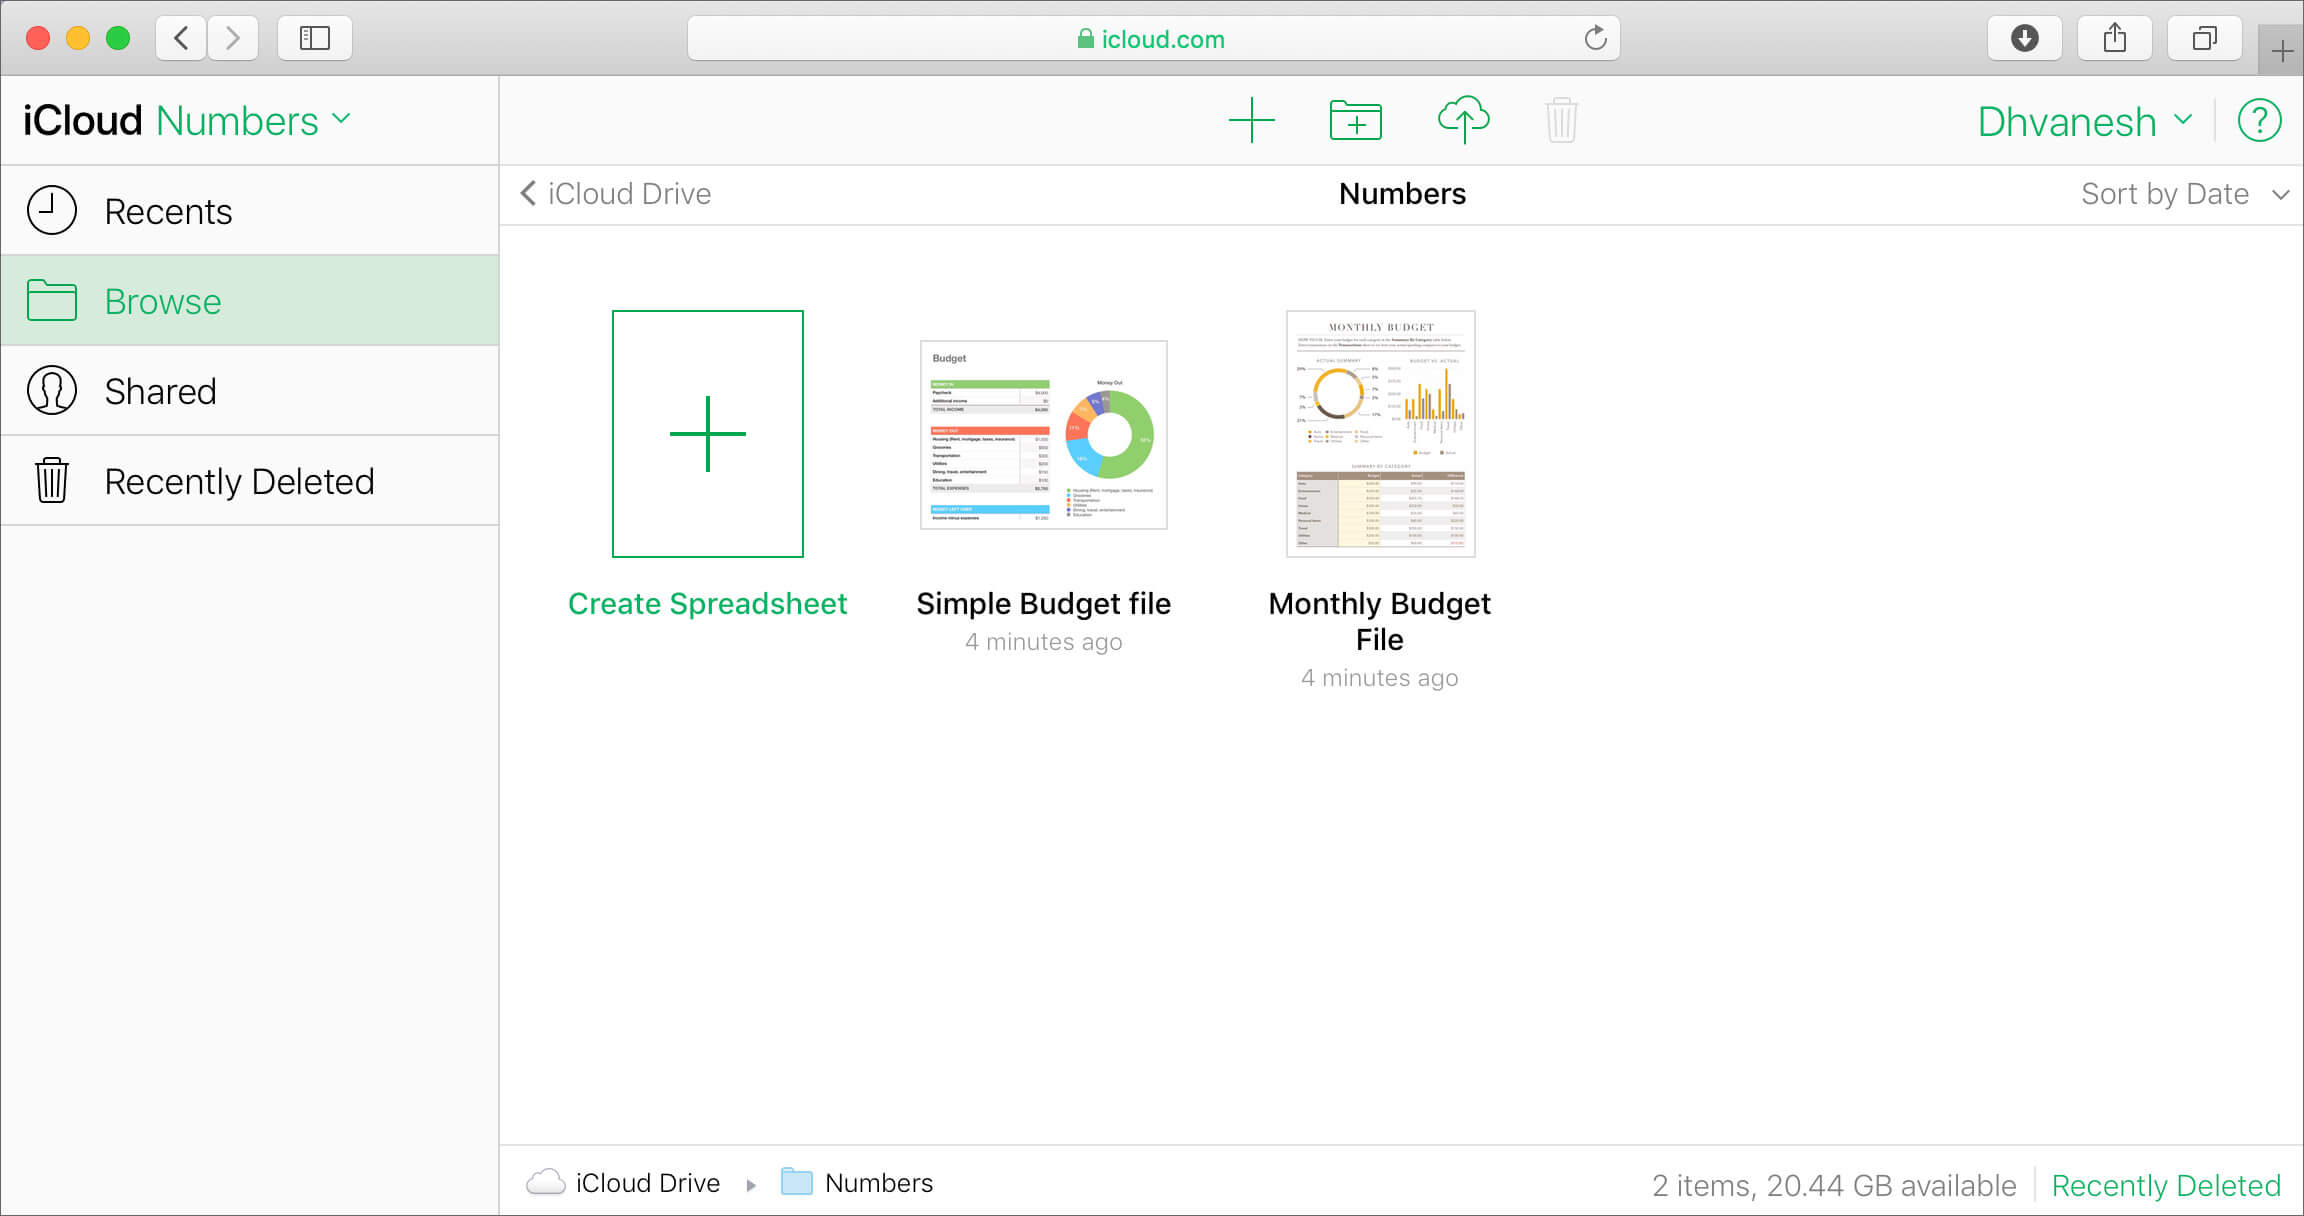 List of documents within the iWork app in iCloud